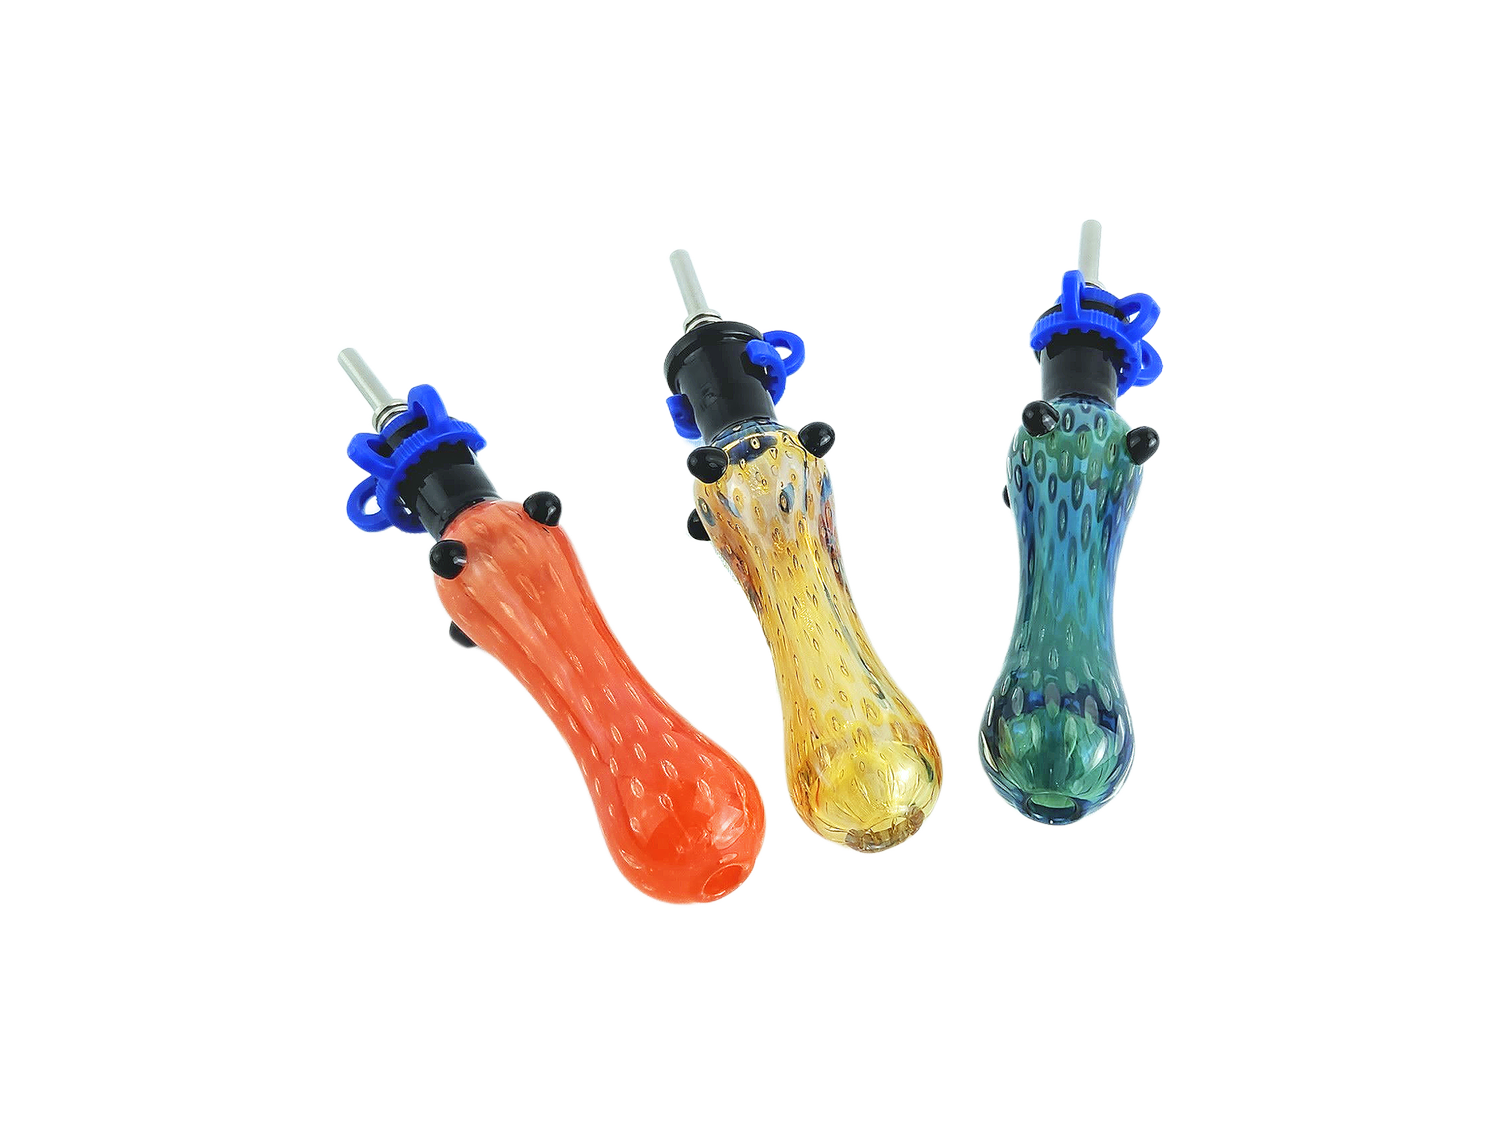 Silicone Nectar Collector Kit - 204 Grams - 10 Inches - Assorted Colors  [NC49] (MSRP $13.00)